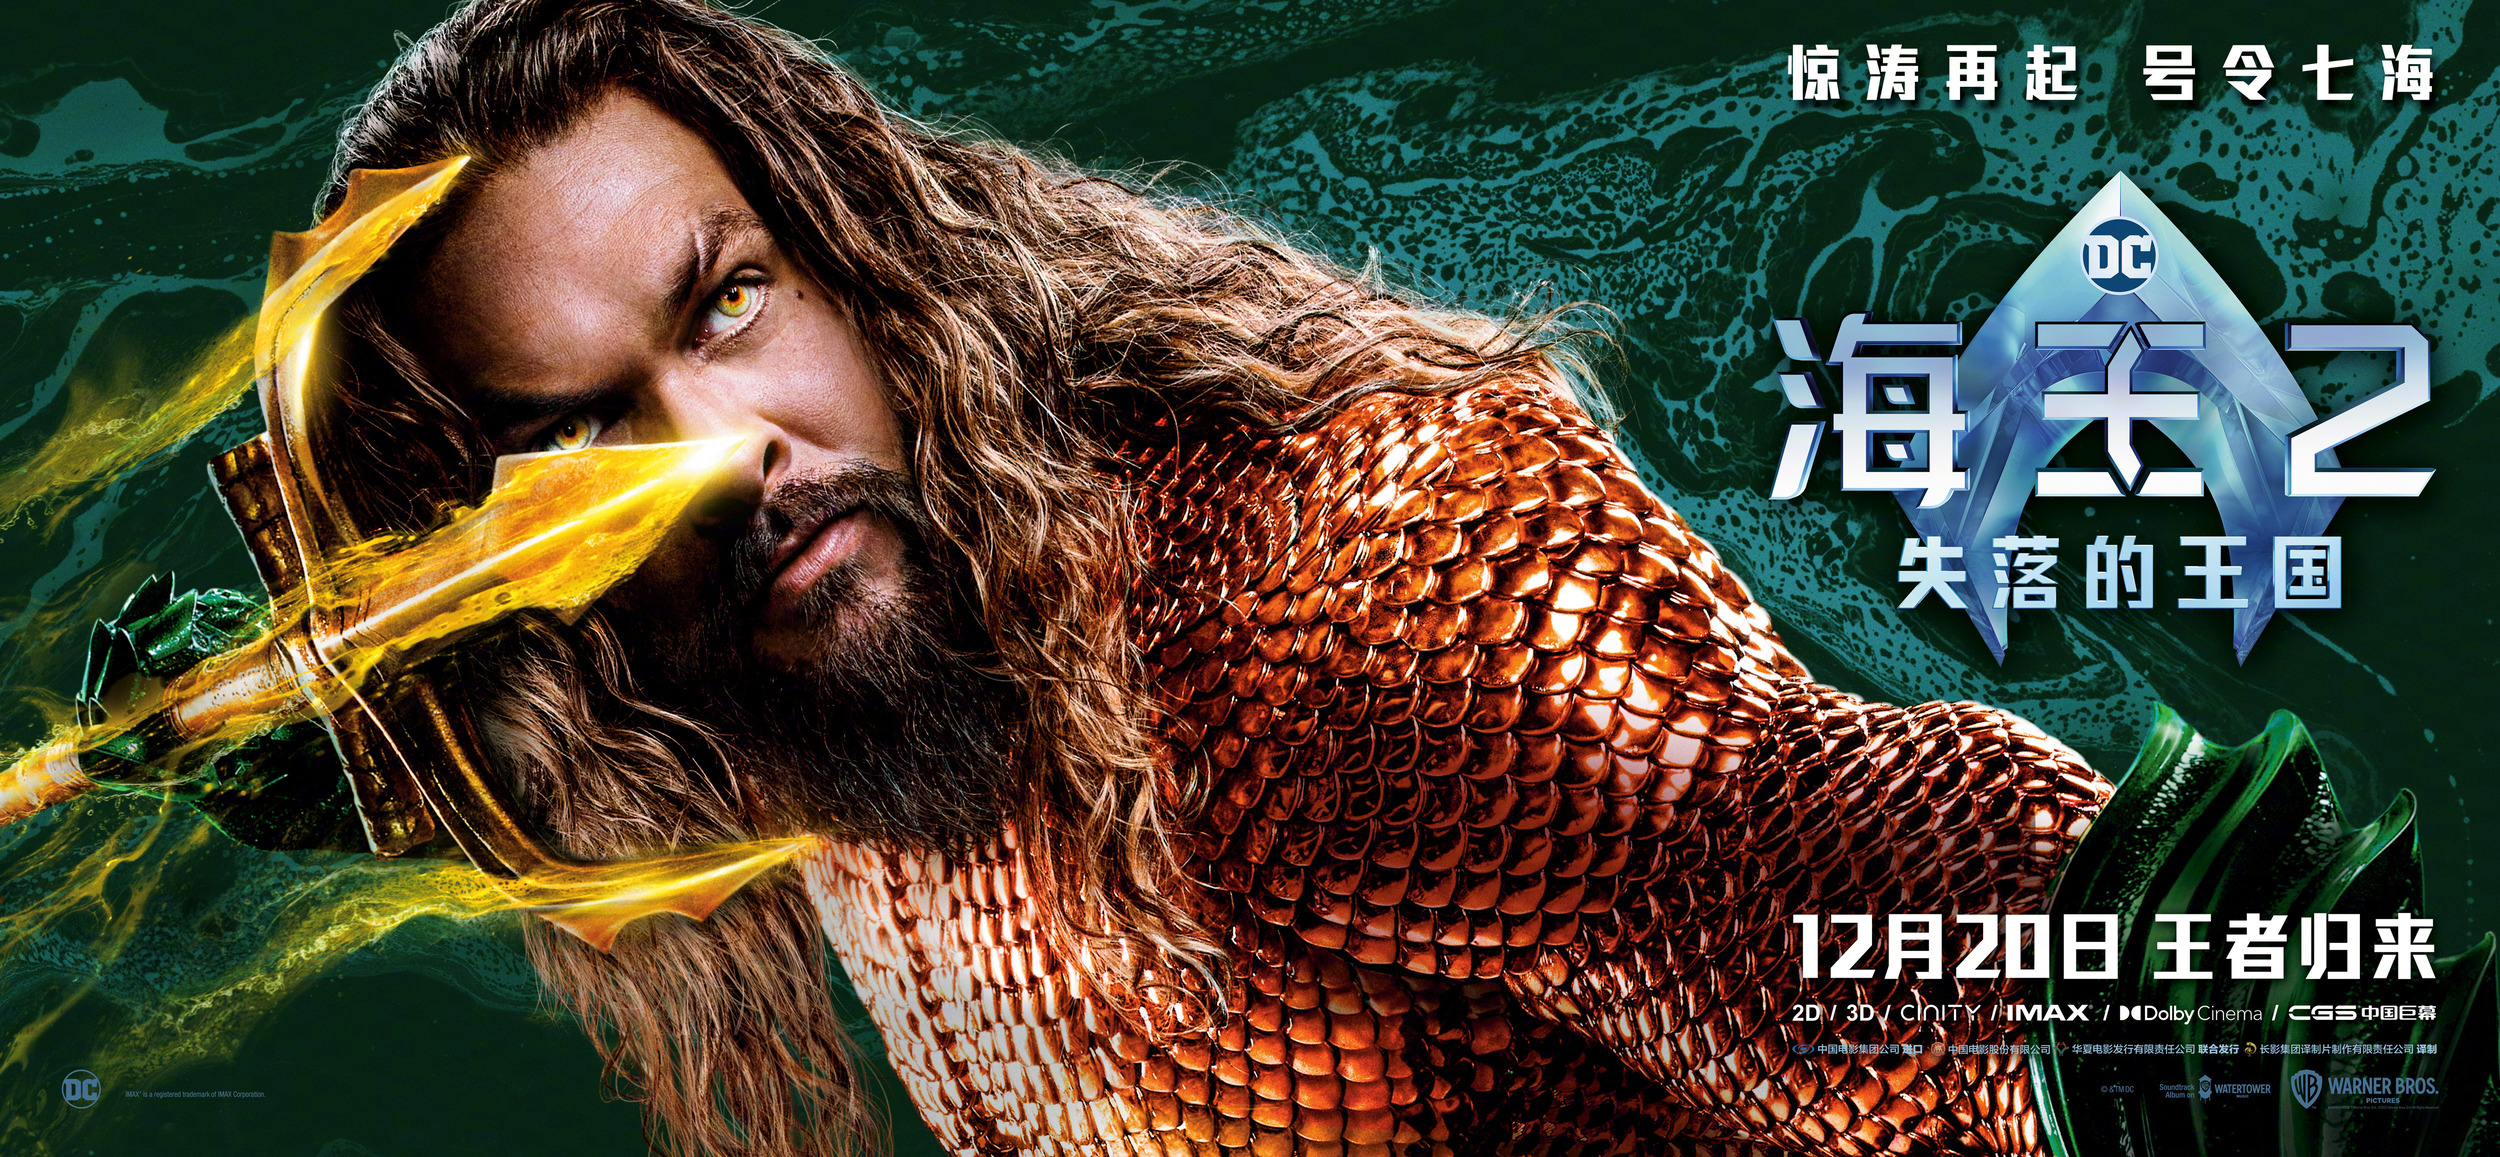 Mega Sized Movie Poster Image for Aquaman and the Lost Kingdom (#13 of 19)